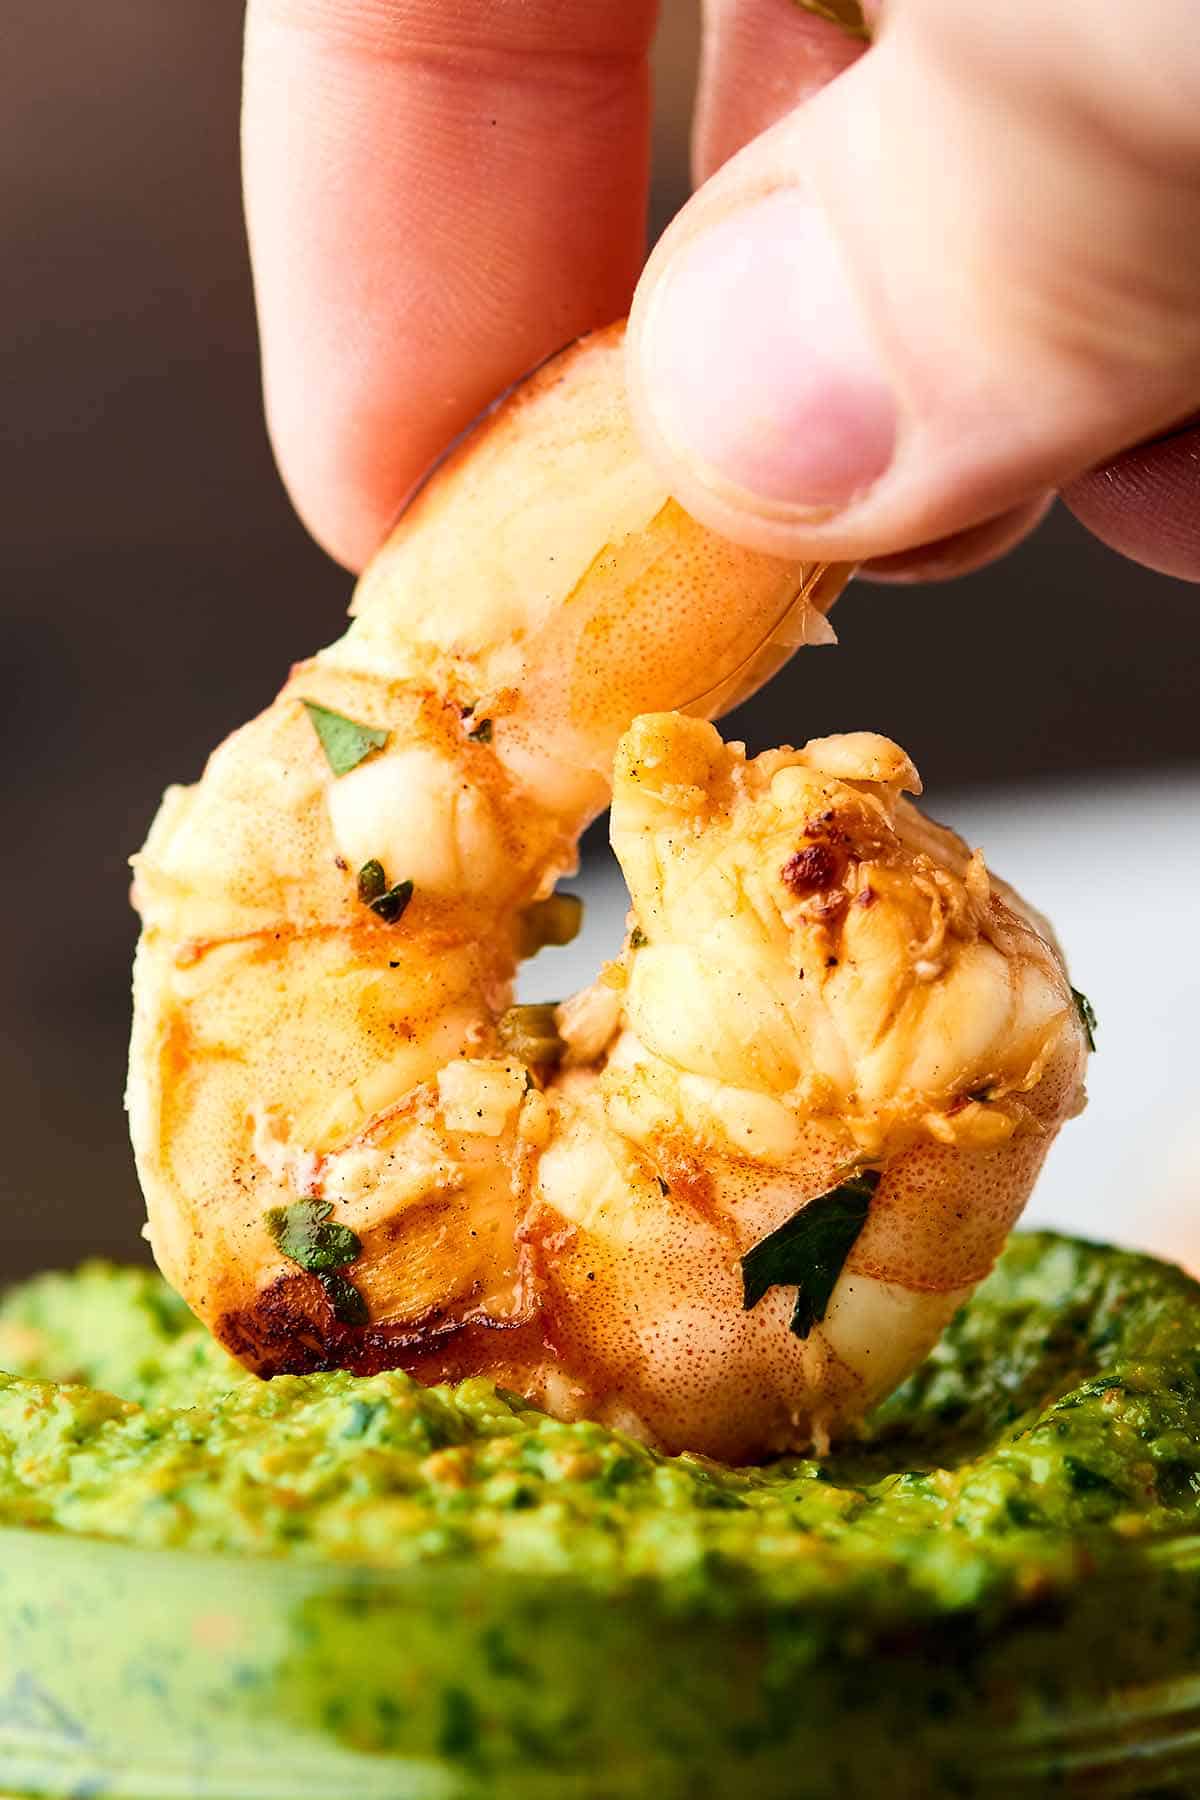 Grilled shrimp being dipped into pesto sauce